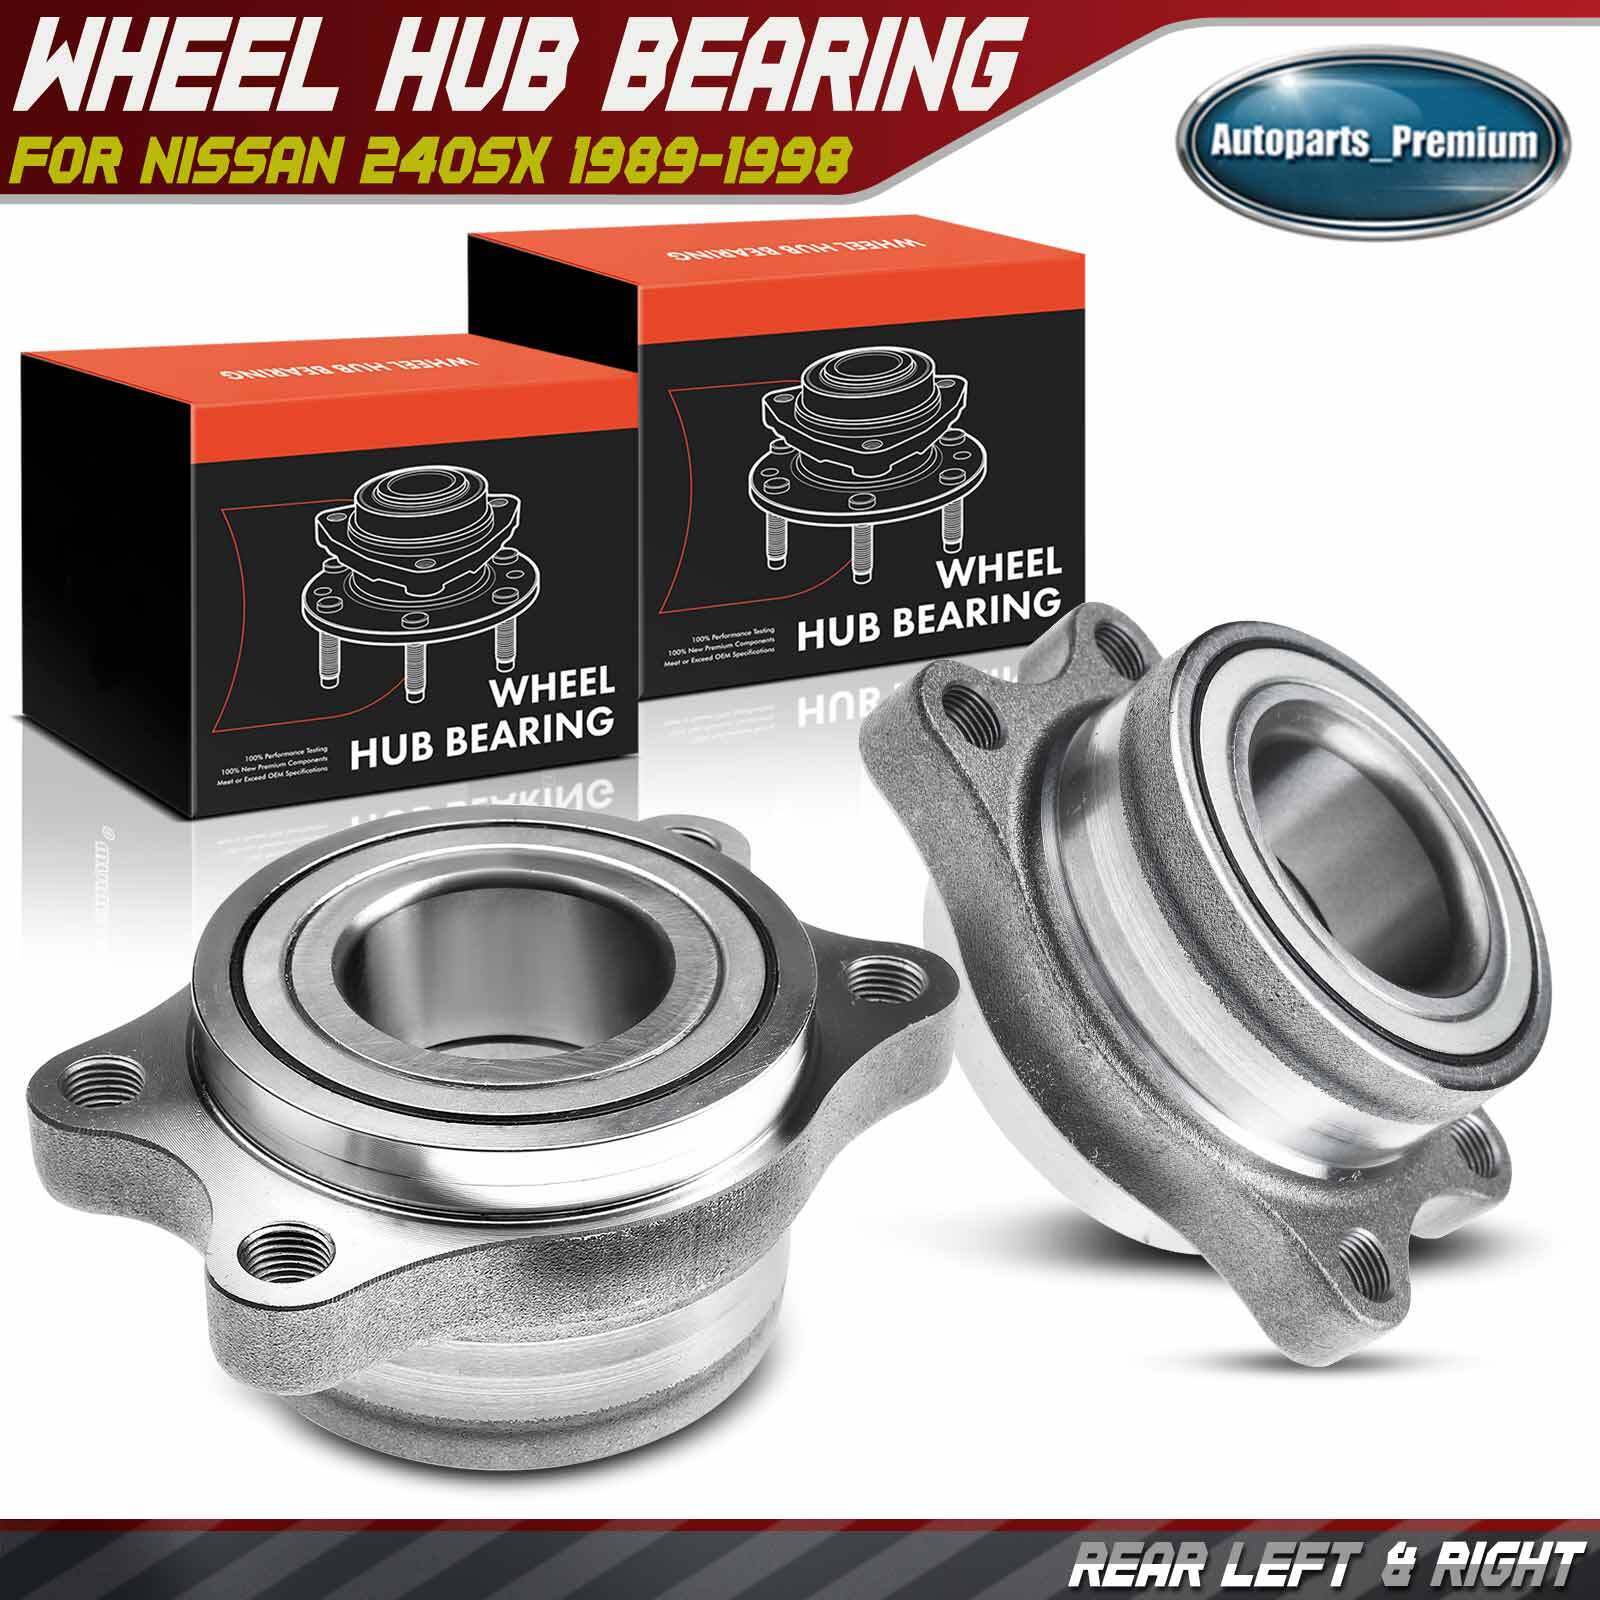 2x Rear Left & Right Wheel Hub Bearing Assembly for Nissan 240SX 1989-1998 2.4L